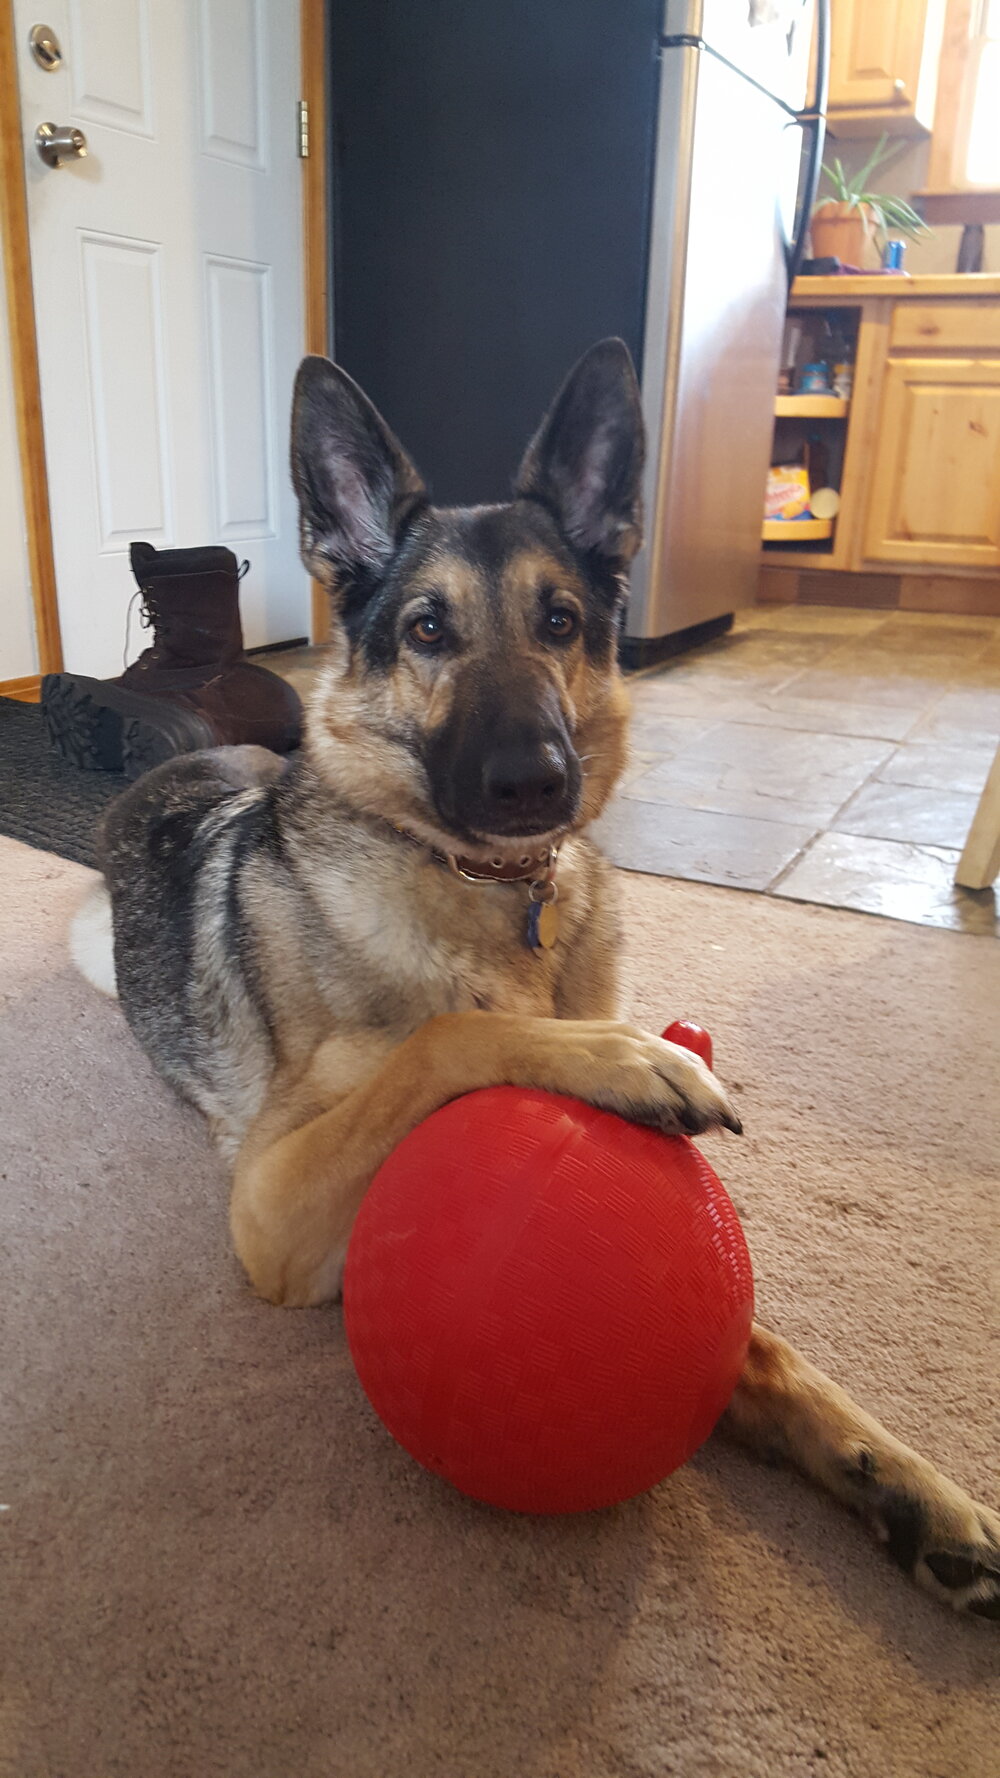 The shelter gave Tikka this big red ball, she loved it!